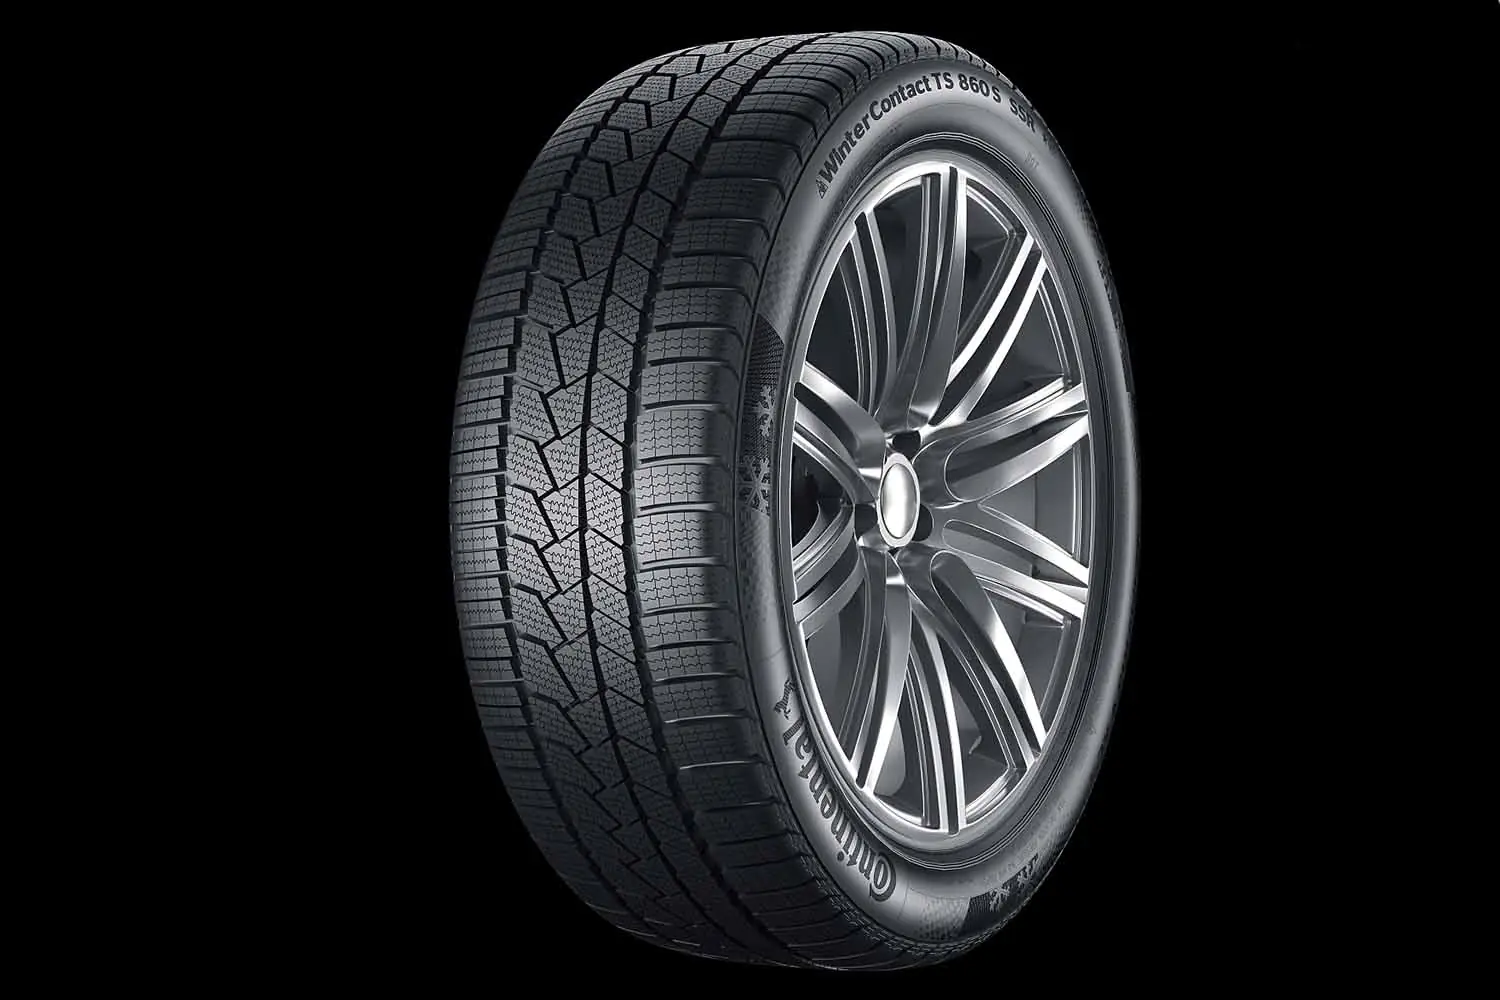 Gomme 4x4 Suv Continental 305/35 R21 109V WINTERCONTACT TS 860 S N0 Y XL M+S Invernale